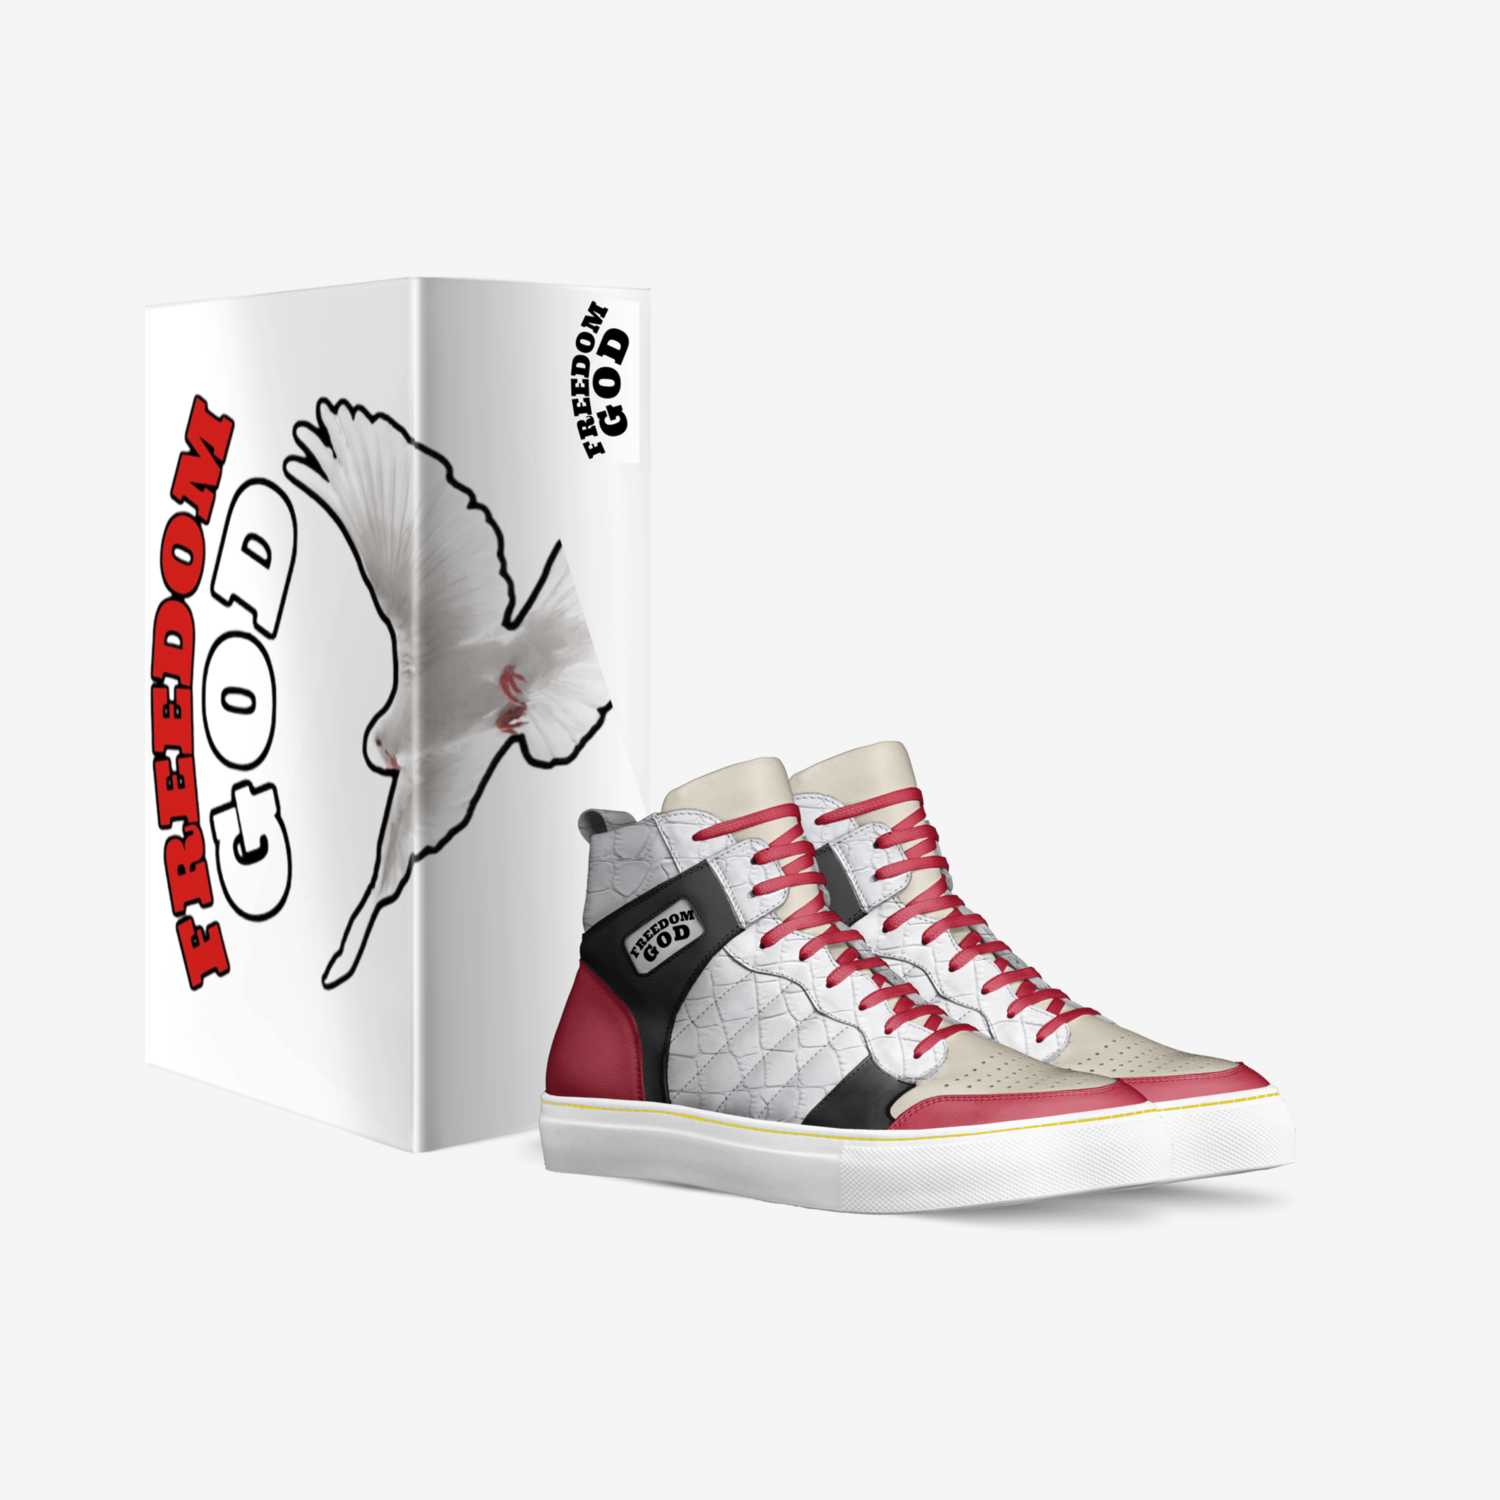 FreedomGod  custom made in Italy shoes by Hassan White | Box view